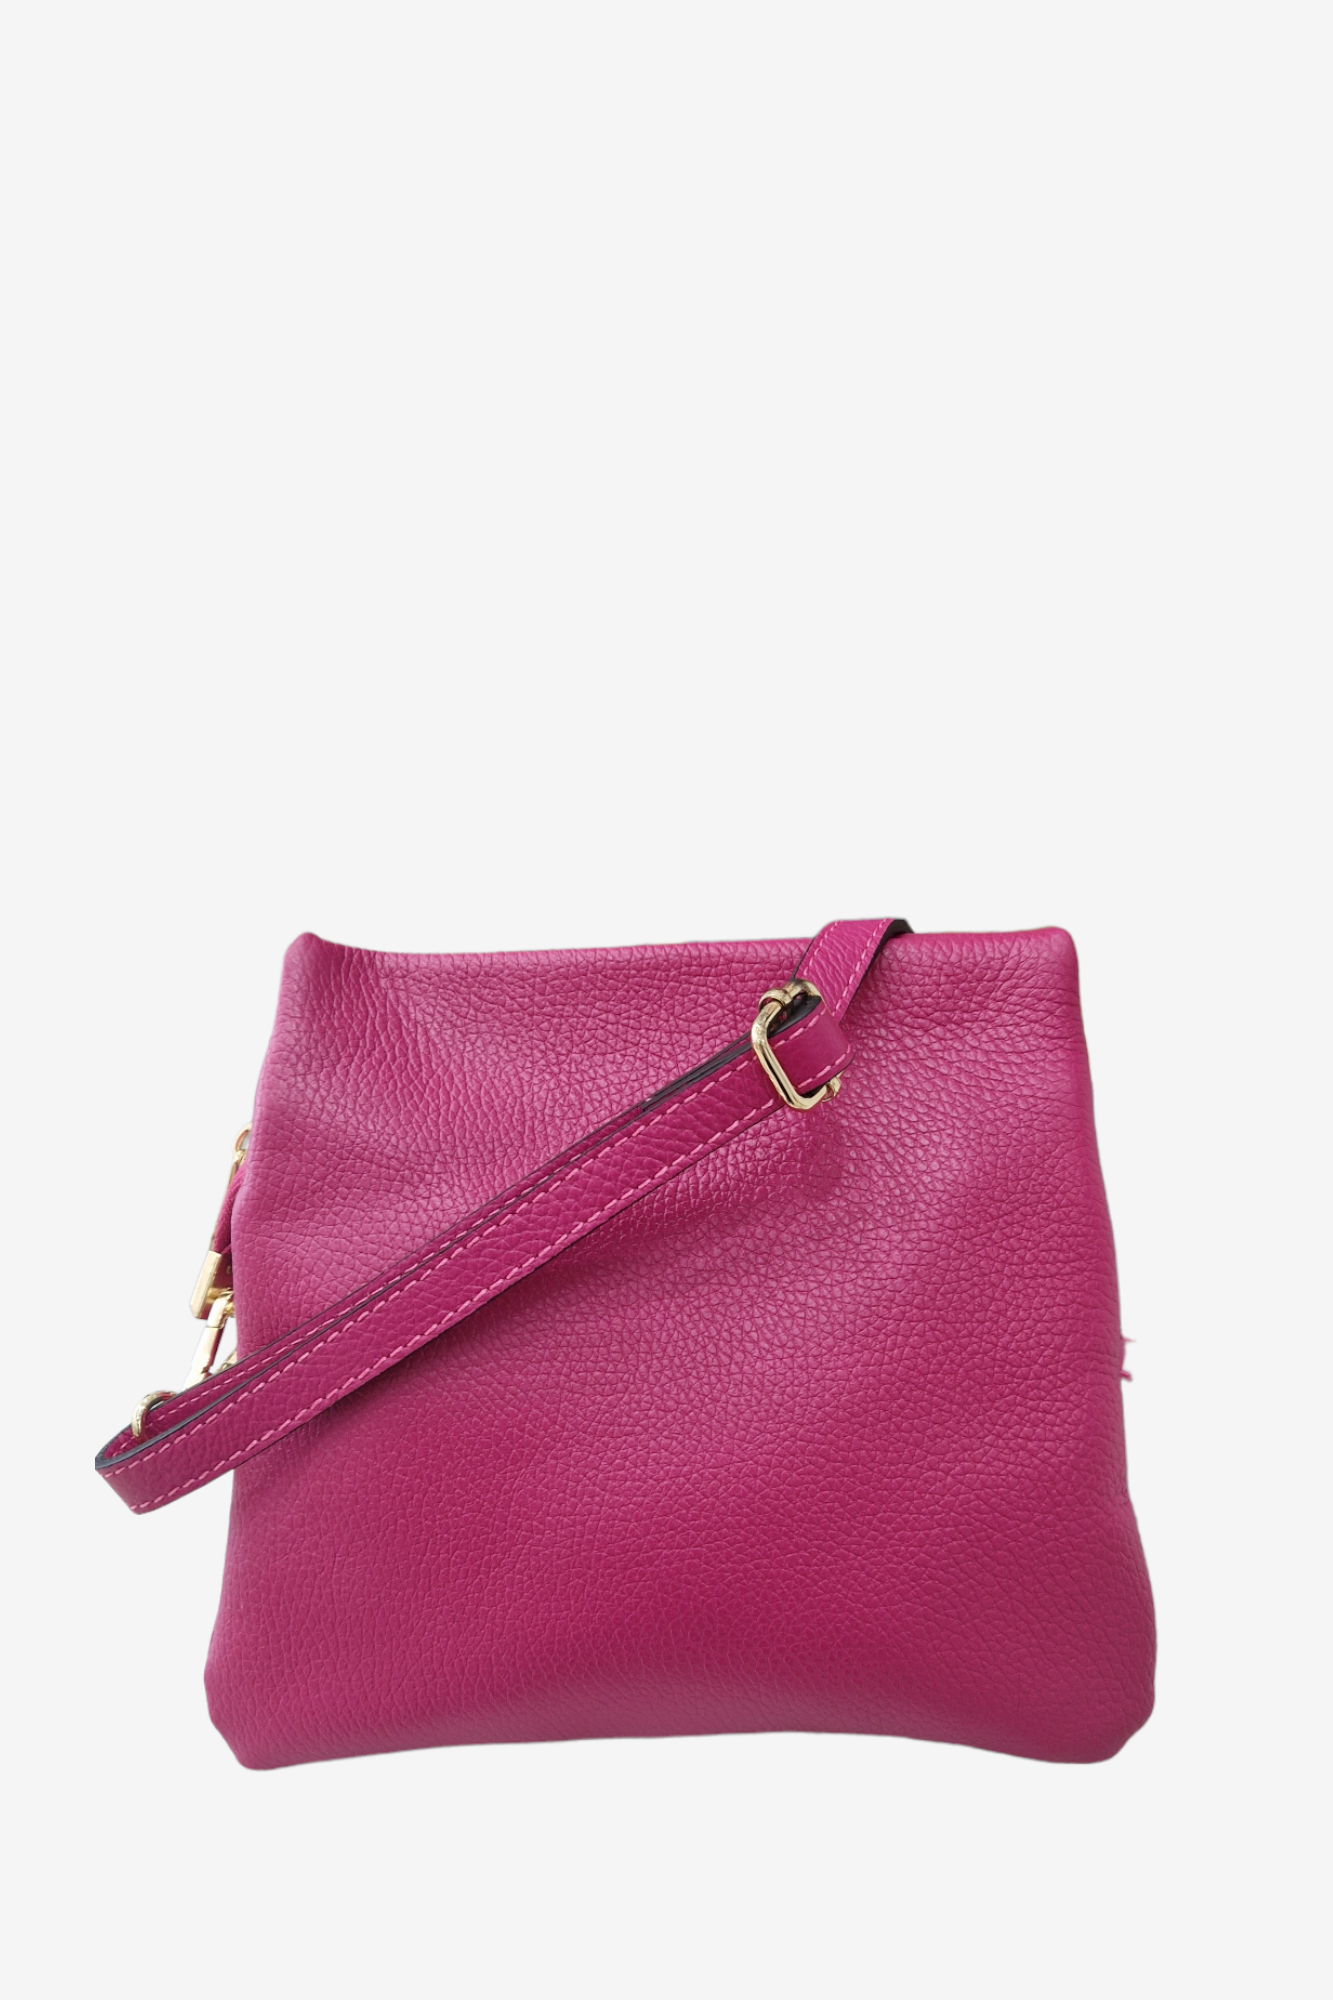 ANDREA CARDONE 1681 PINK LEATHER BAG